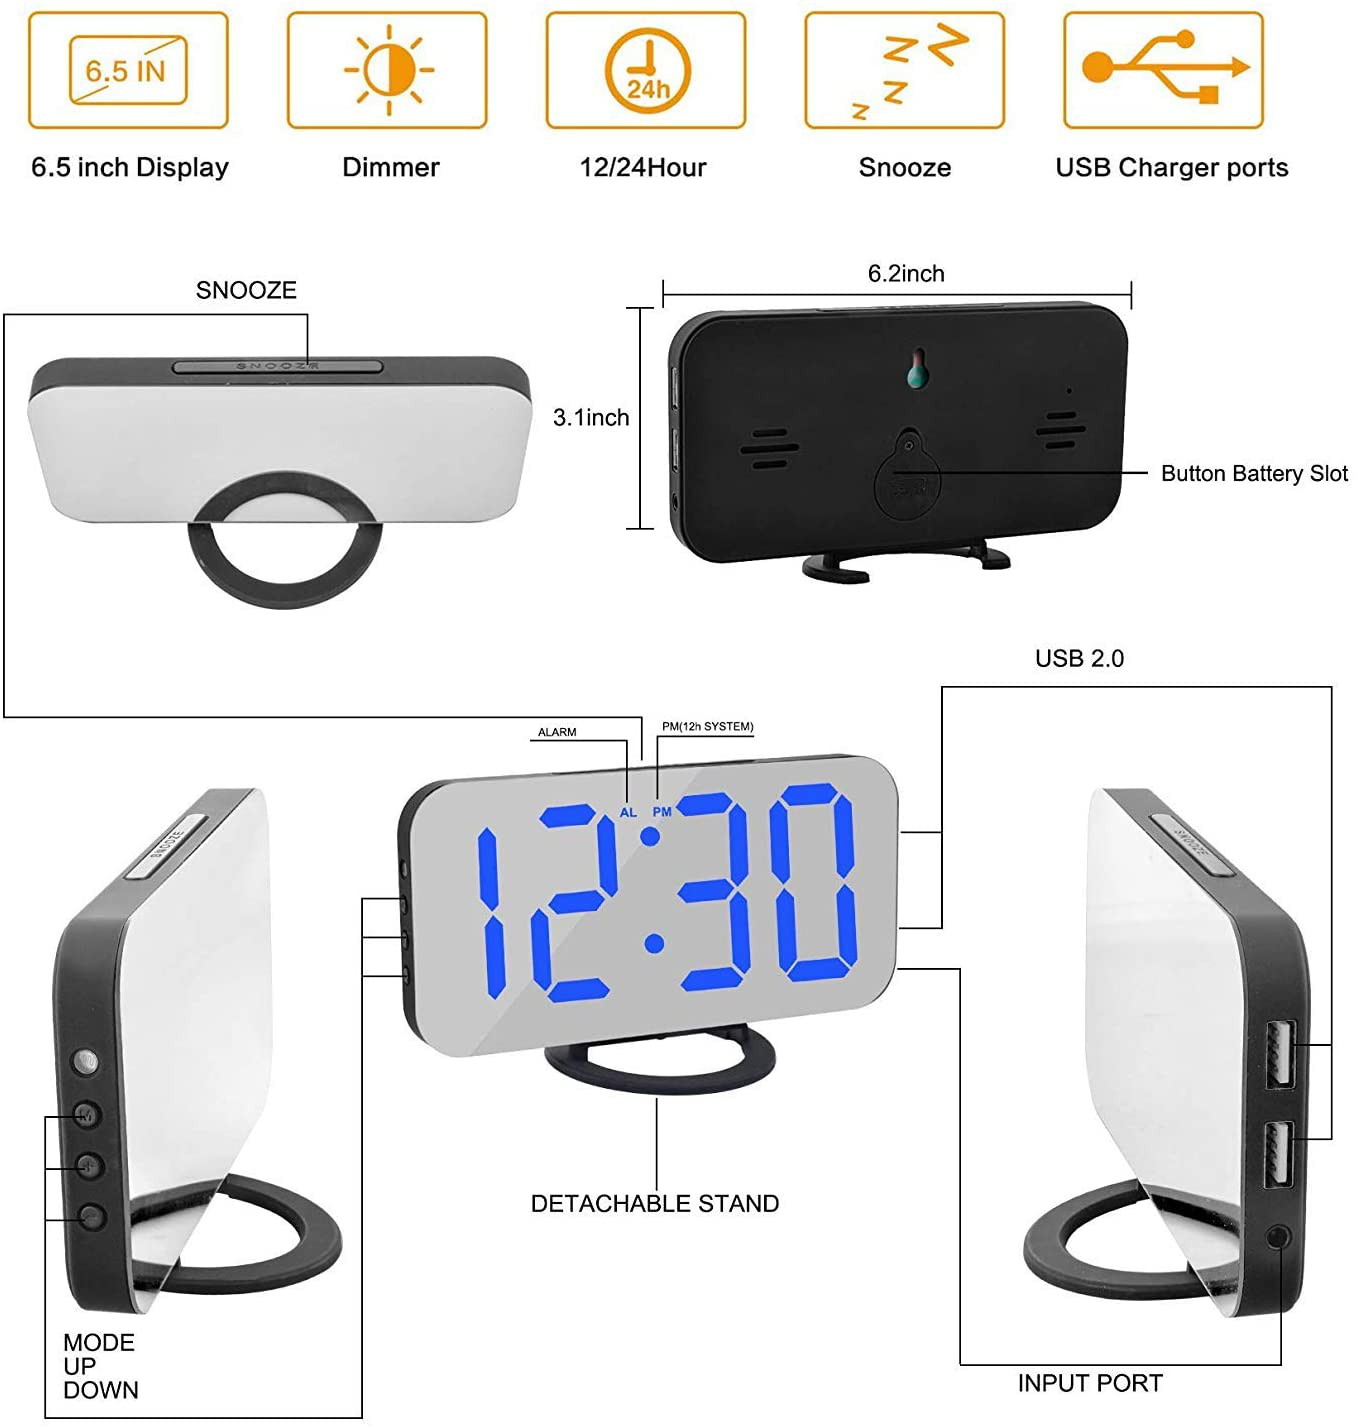 Digital Clock Large Display,Alarm Clocks Mirror Surface,with 2 USB Charger Ports,Auto Diming , Snooze, Small Desk Electric Clock for Bedroom Office Living Room Decor - Green